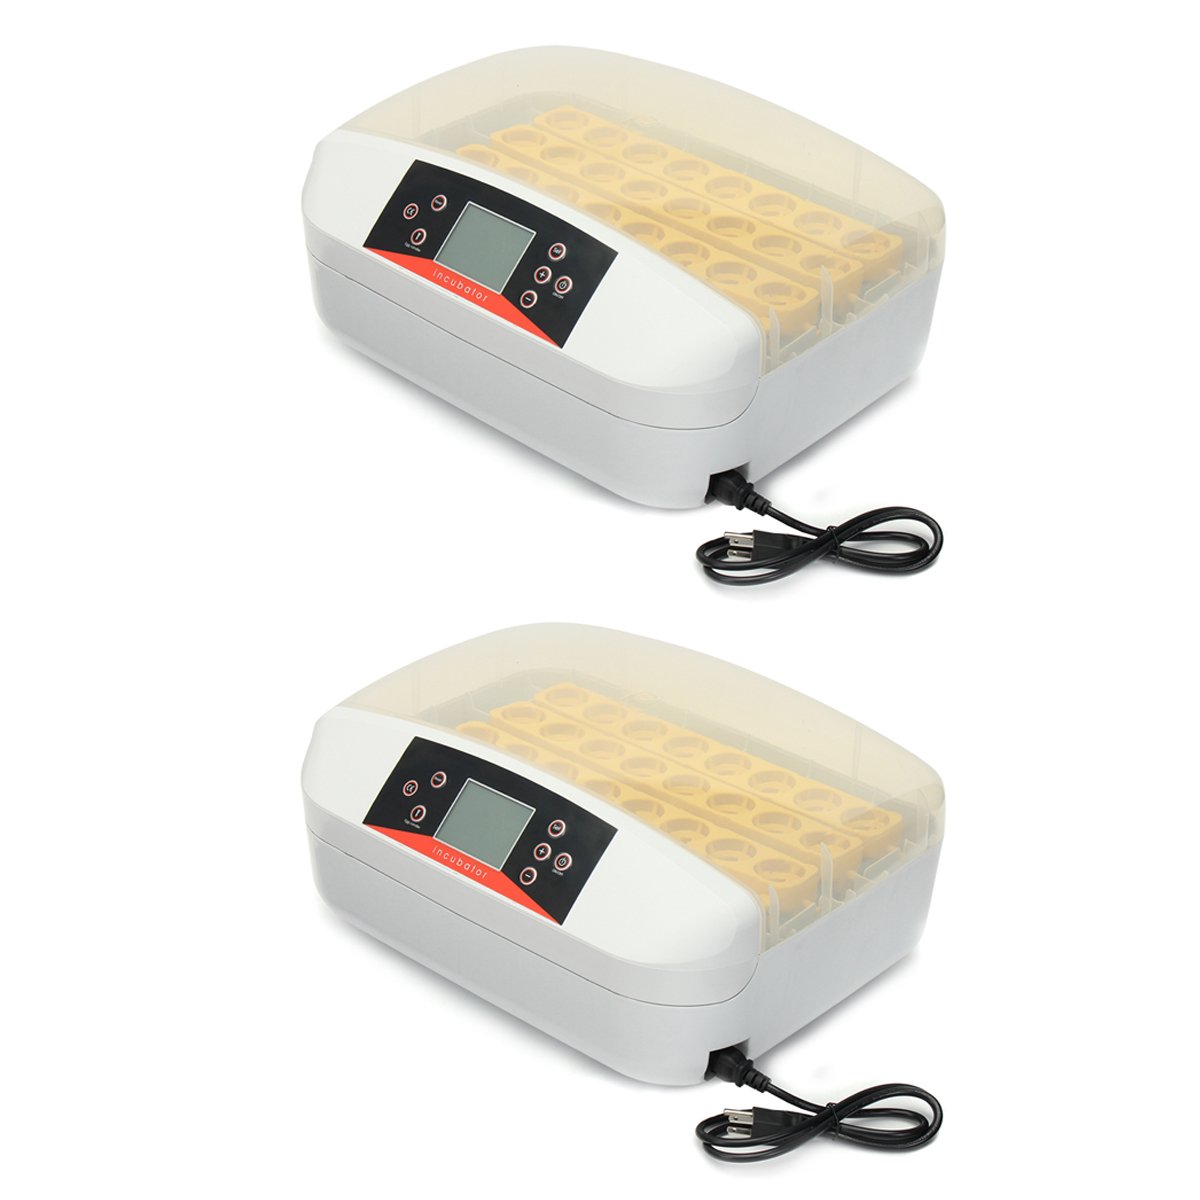 32 Position Electronic Digital Incubator Automatic Hatcher for Poultry Eggs Chicken Egg 1